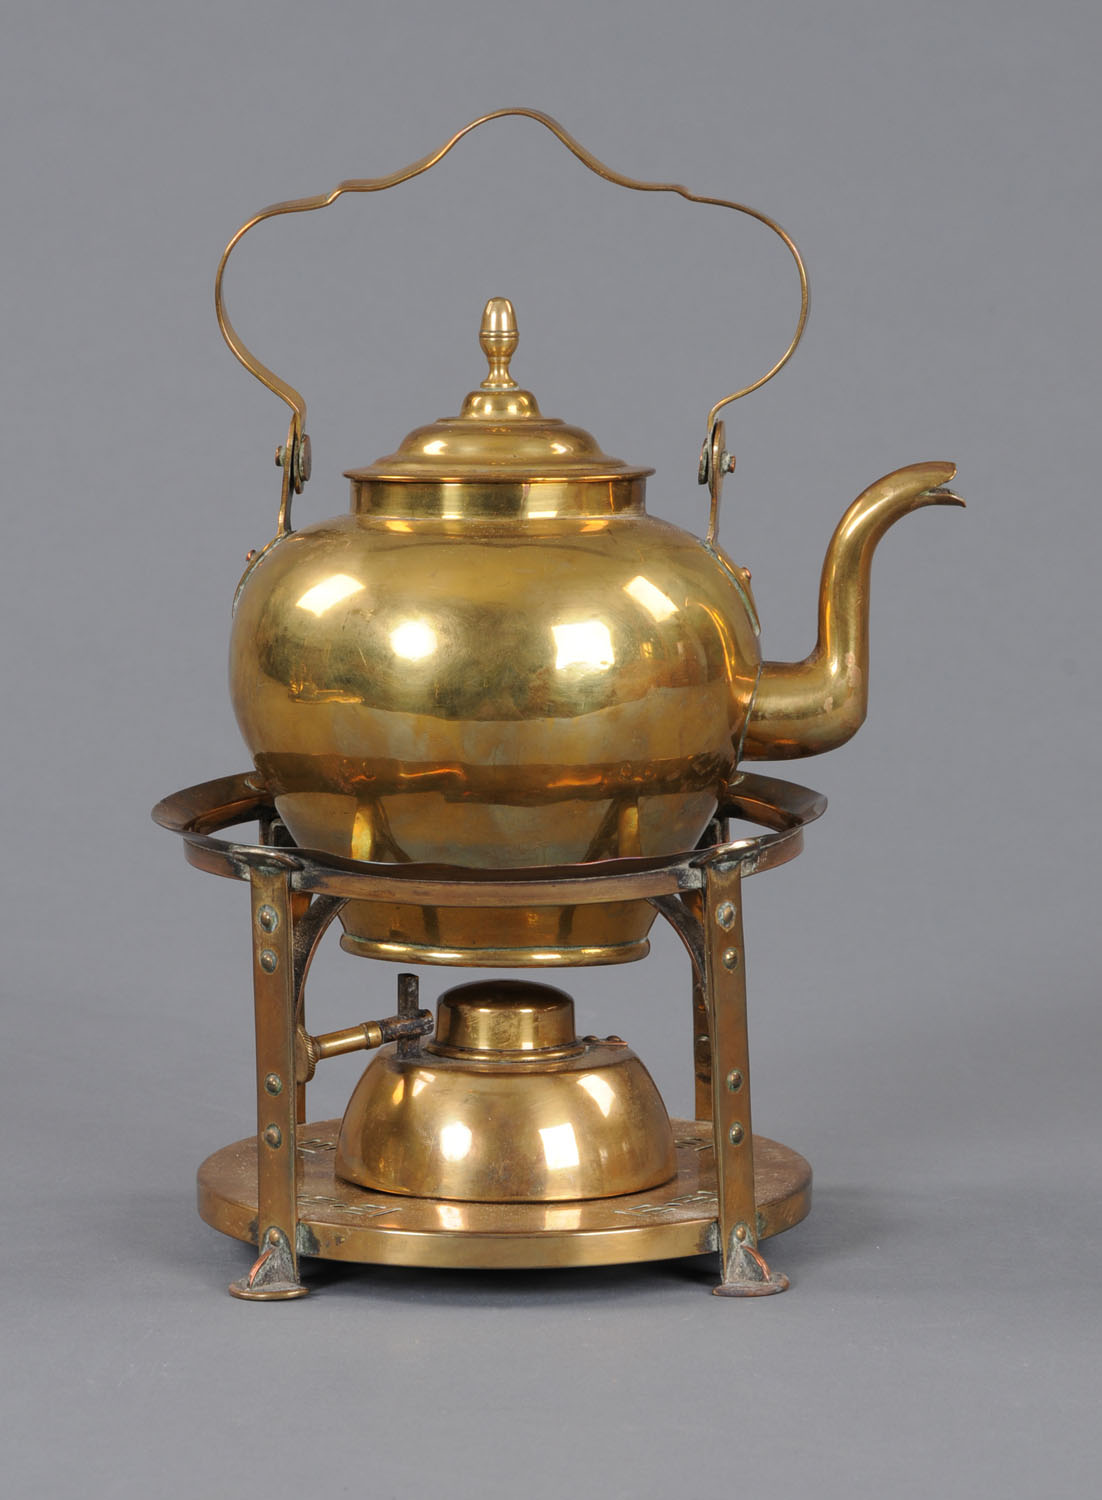 A late 19th century brass kettle, with stand and burner, in the Arts and Crafts style.